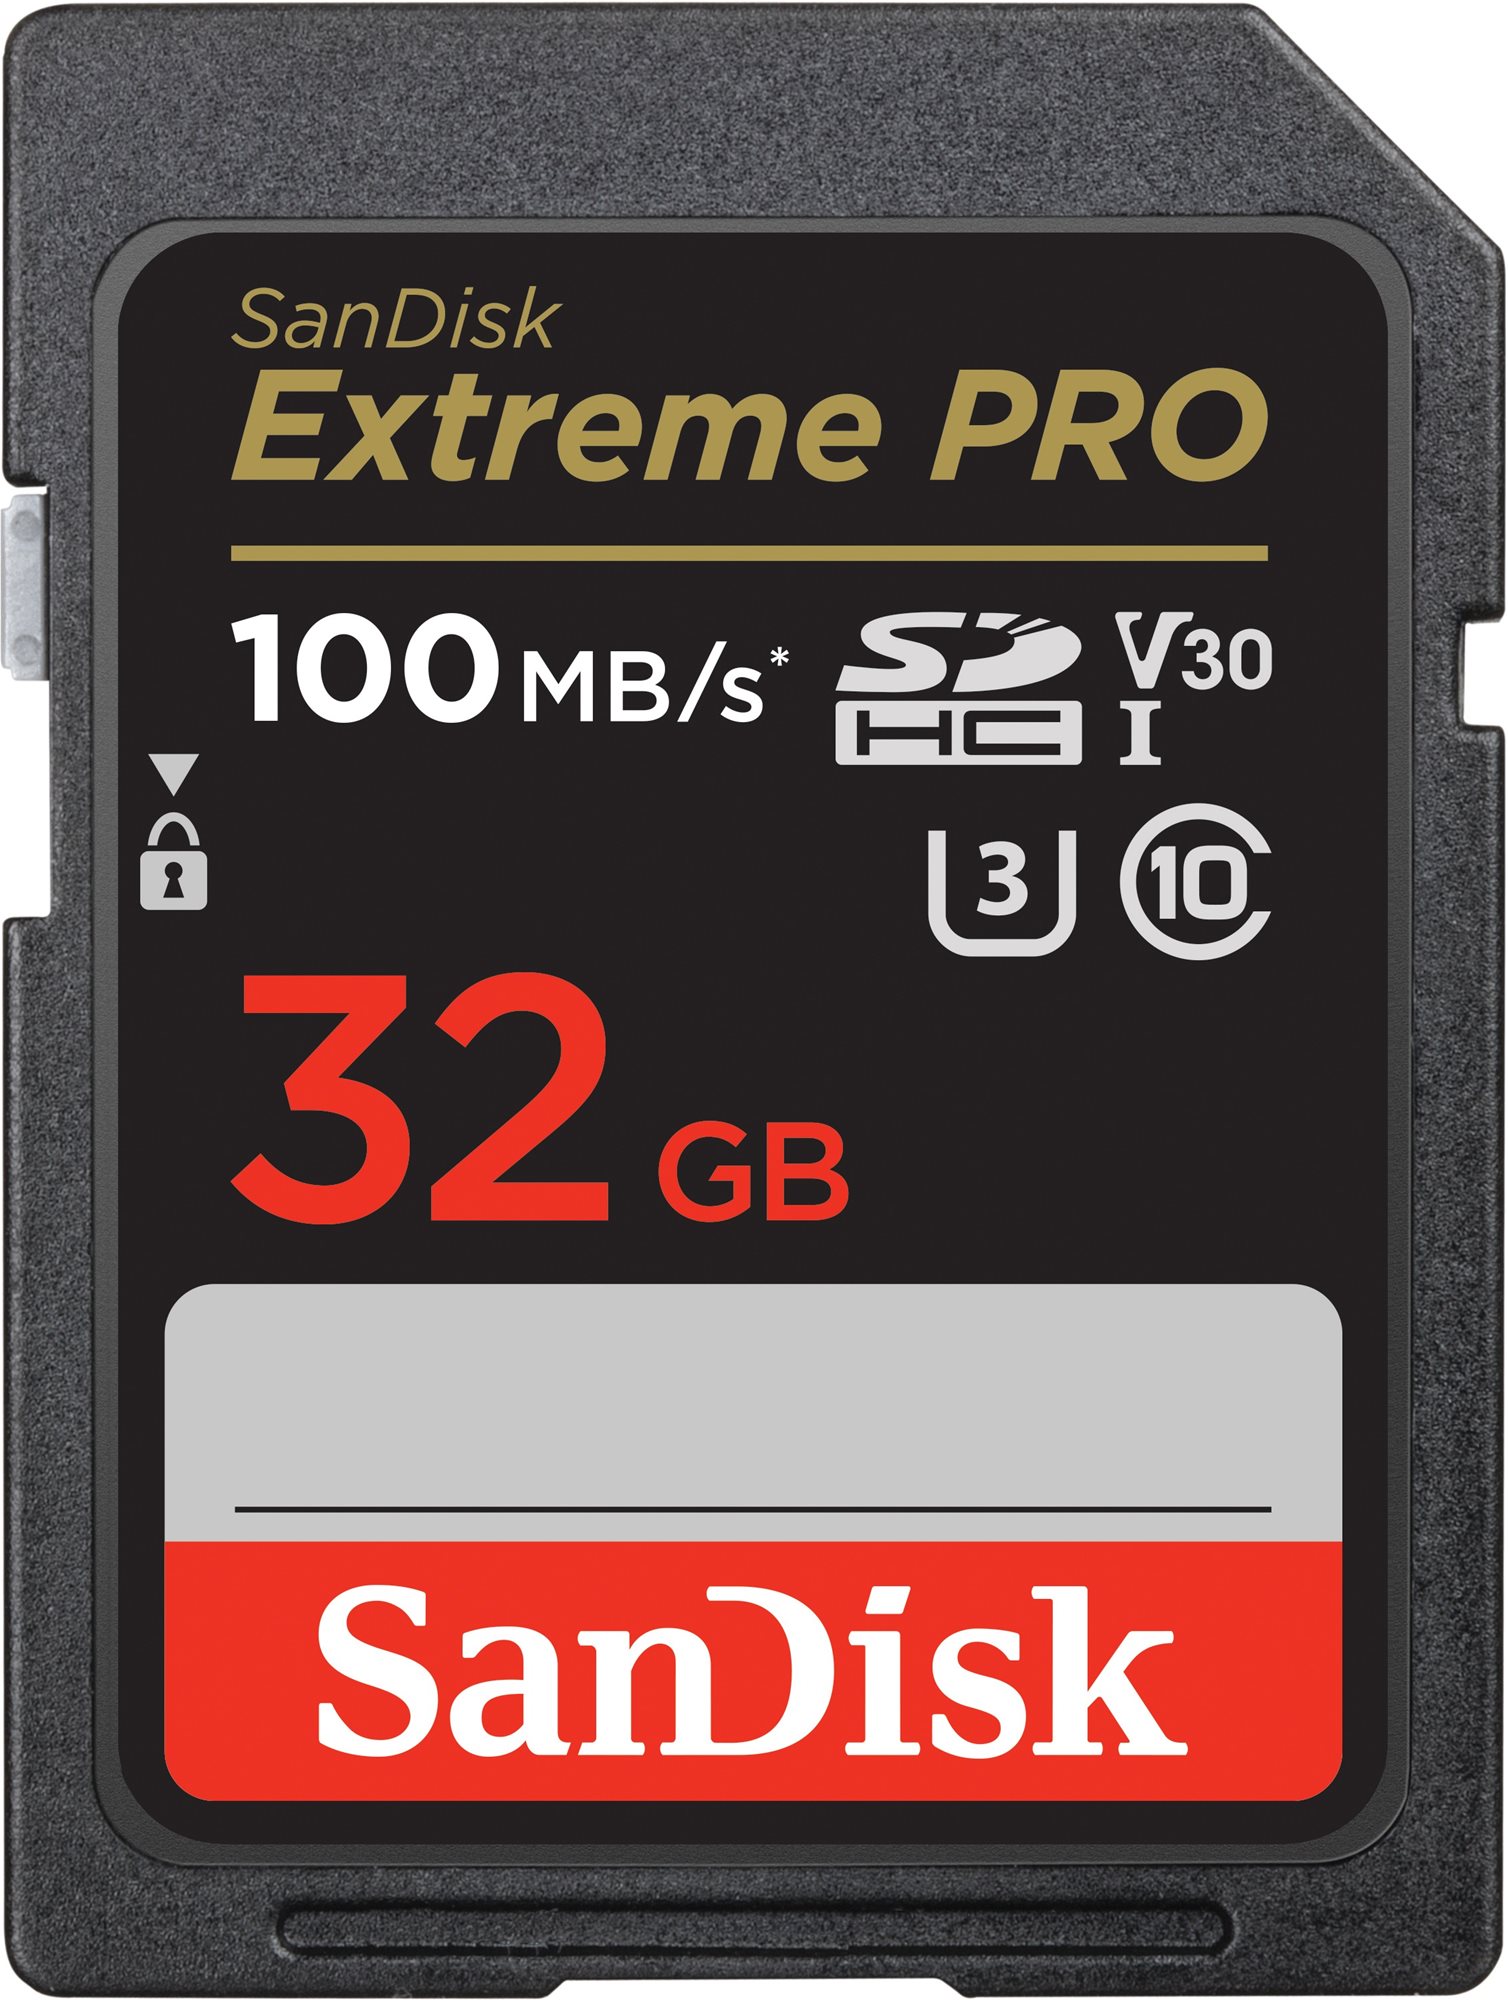 SanDisk SDHC 32 GB Extreme PRO + Rescue PRO Deluxe